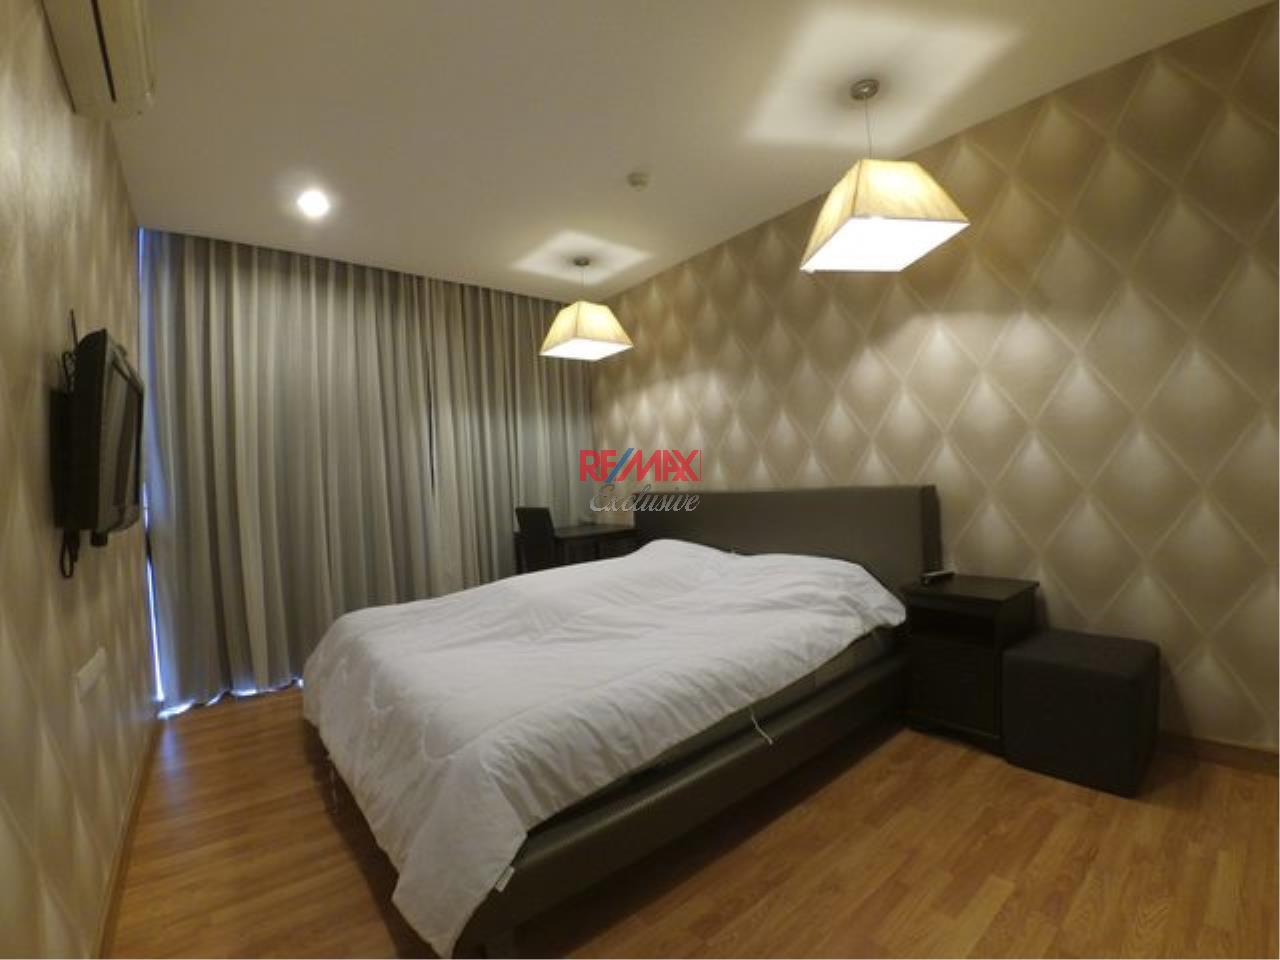 RE/MAX Exclusive Agency's THE ALCOVE, Thonglor 10, 44 Sqm., 1 Bedroom, Fully-Furnished, Fully Equipped Kitchen For RENT !!!! 13